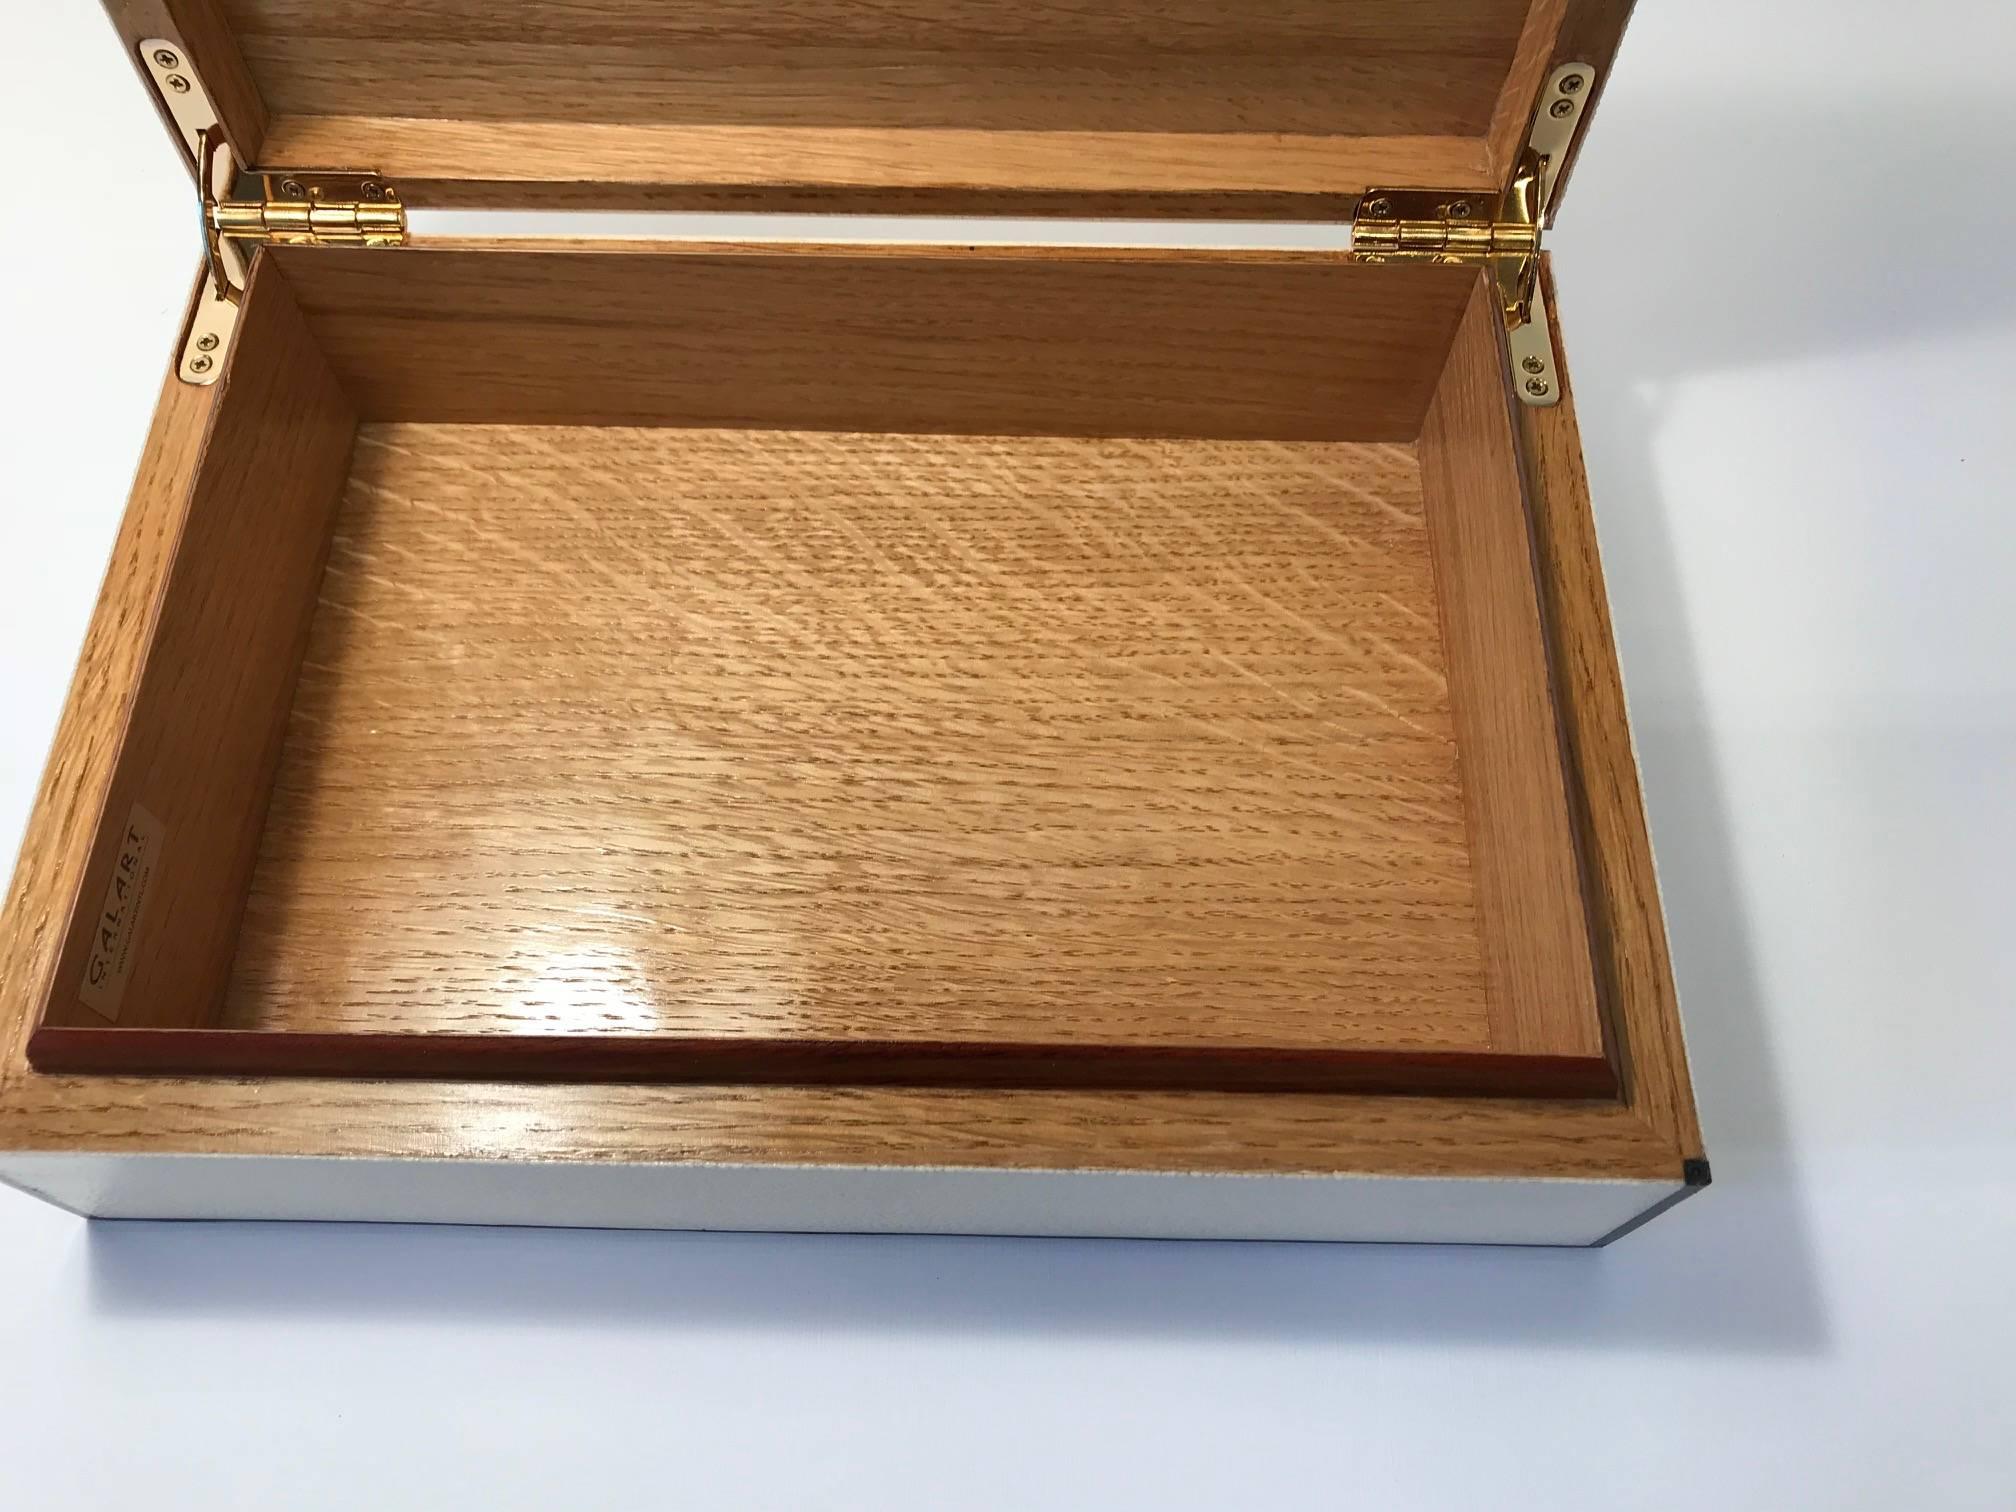  Natural Shagreen Box with Ebony Inlay For Sale 4